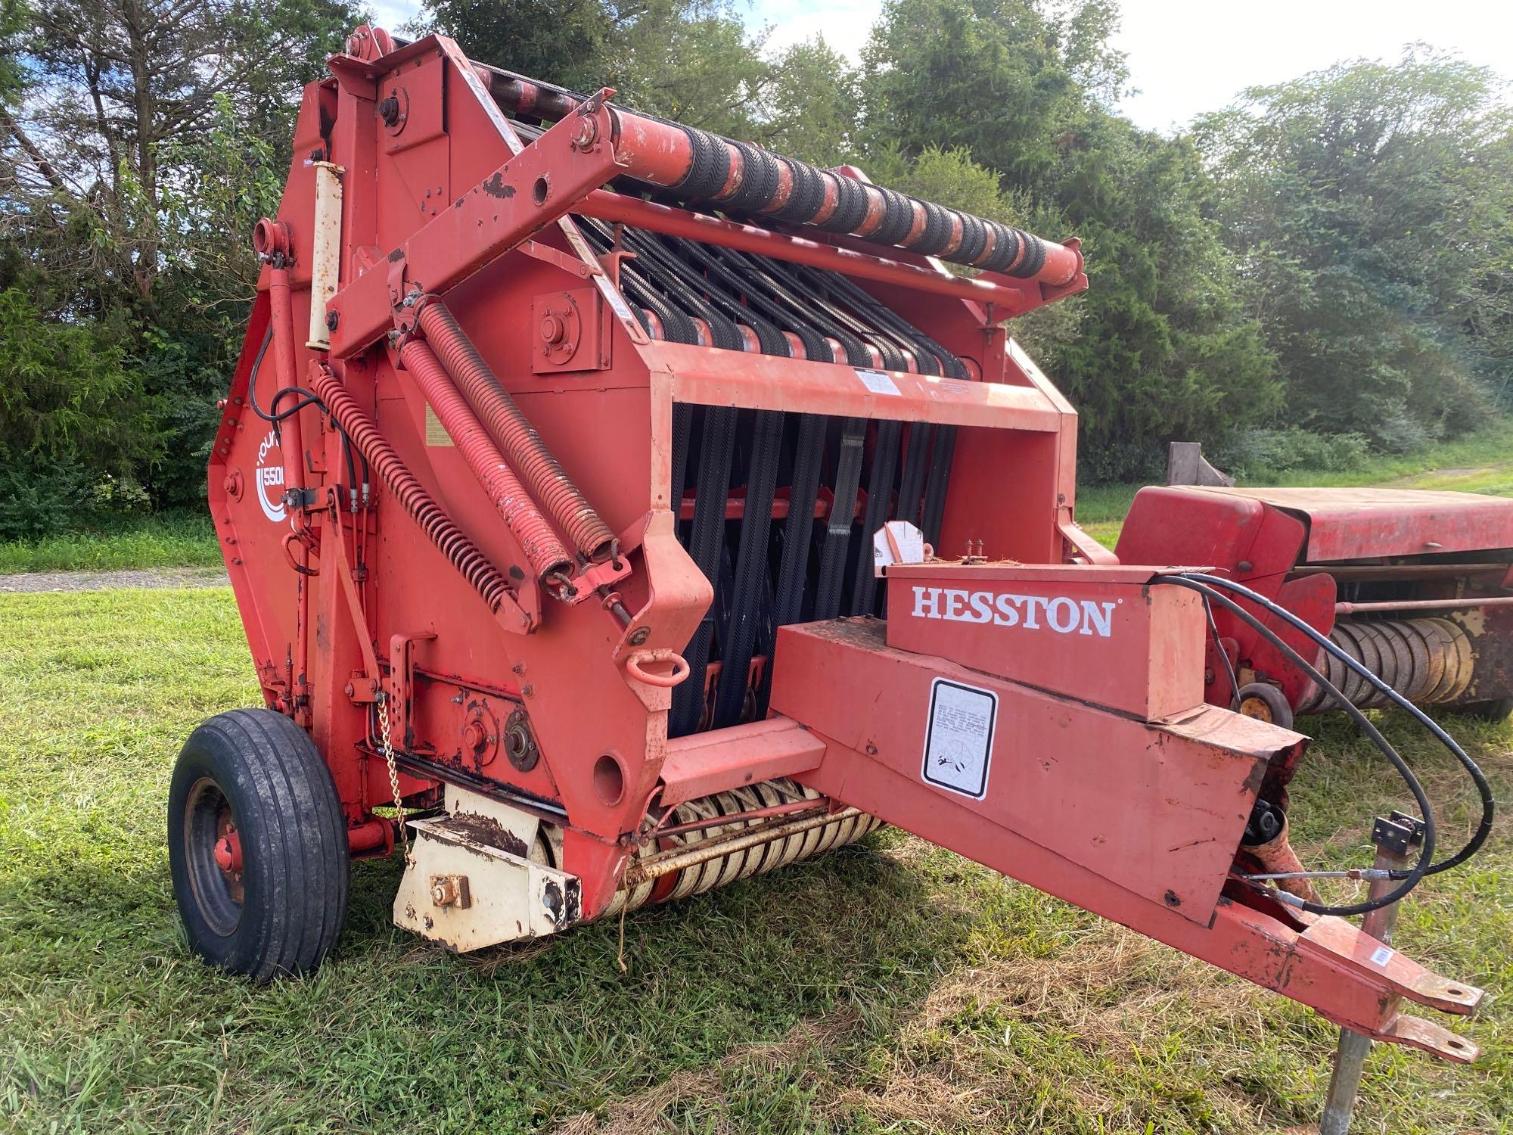 Image for Hesston 5500 Round Bale, Per seller- shed kept and ready for field